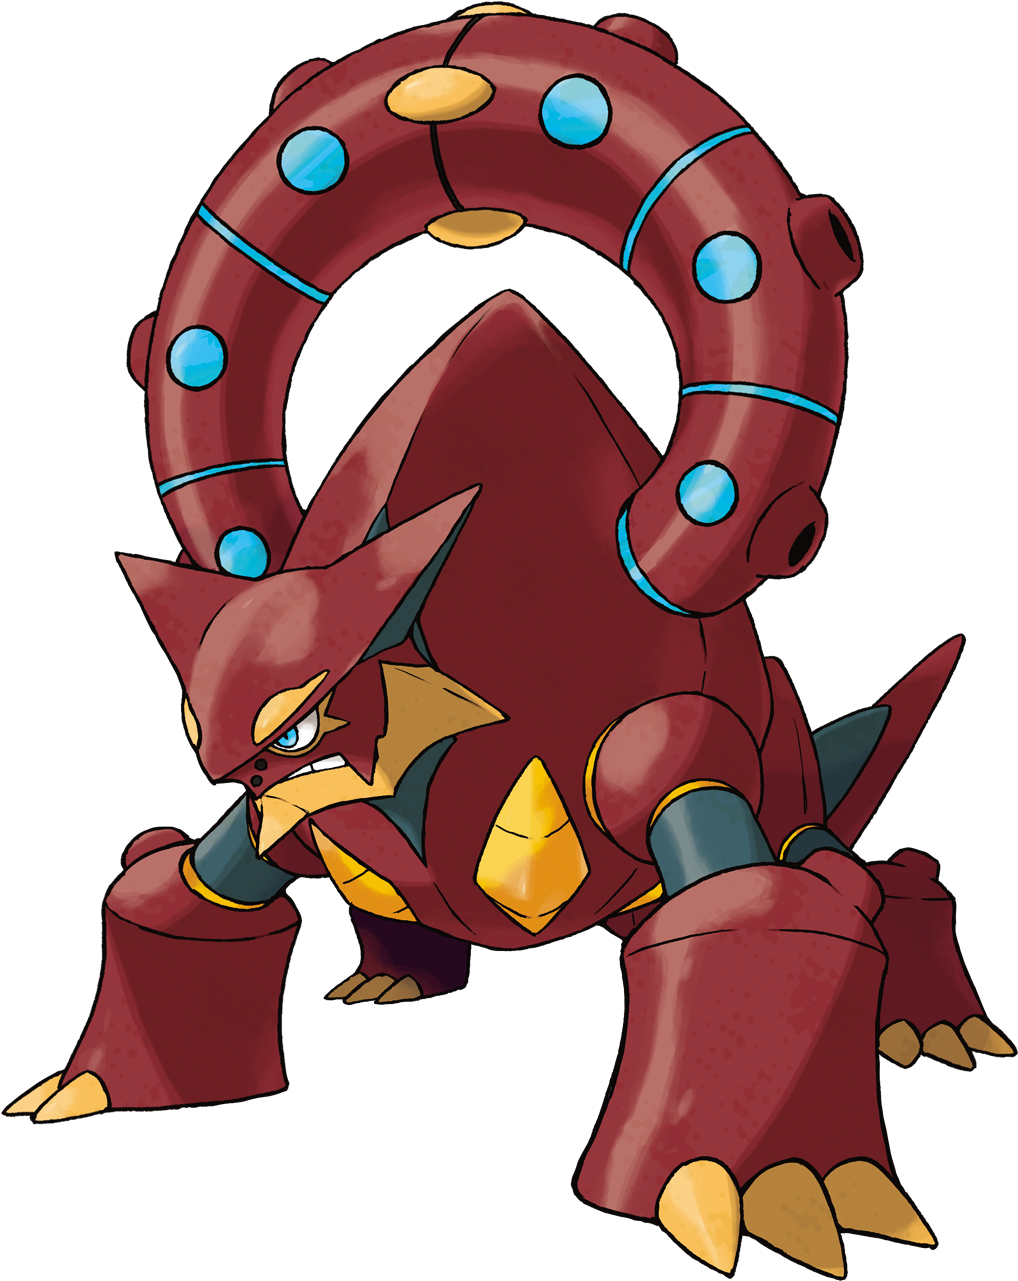 Everywhere Else, Including Its Official Art - Volcanion Qr Code In Pokemon Ultra Sun (2750x2750)